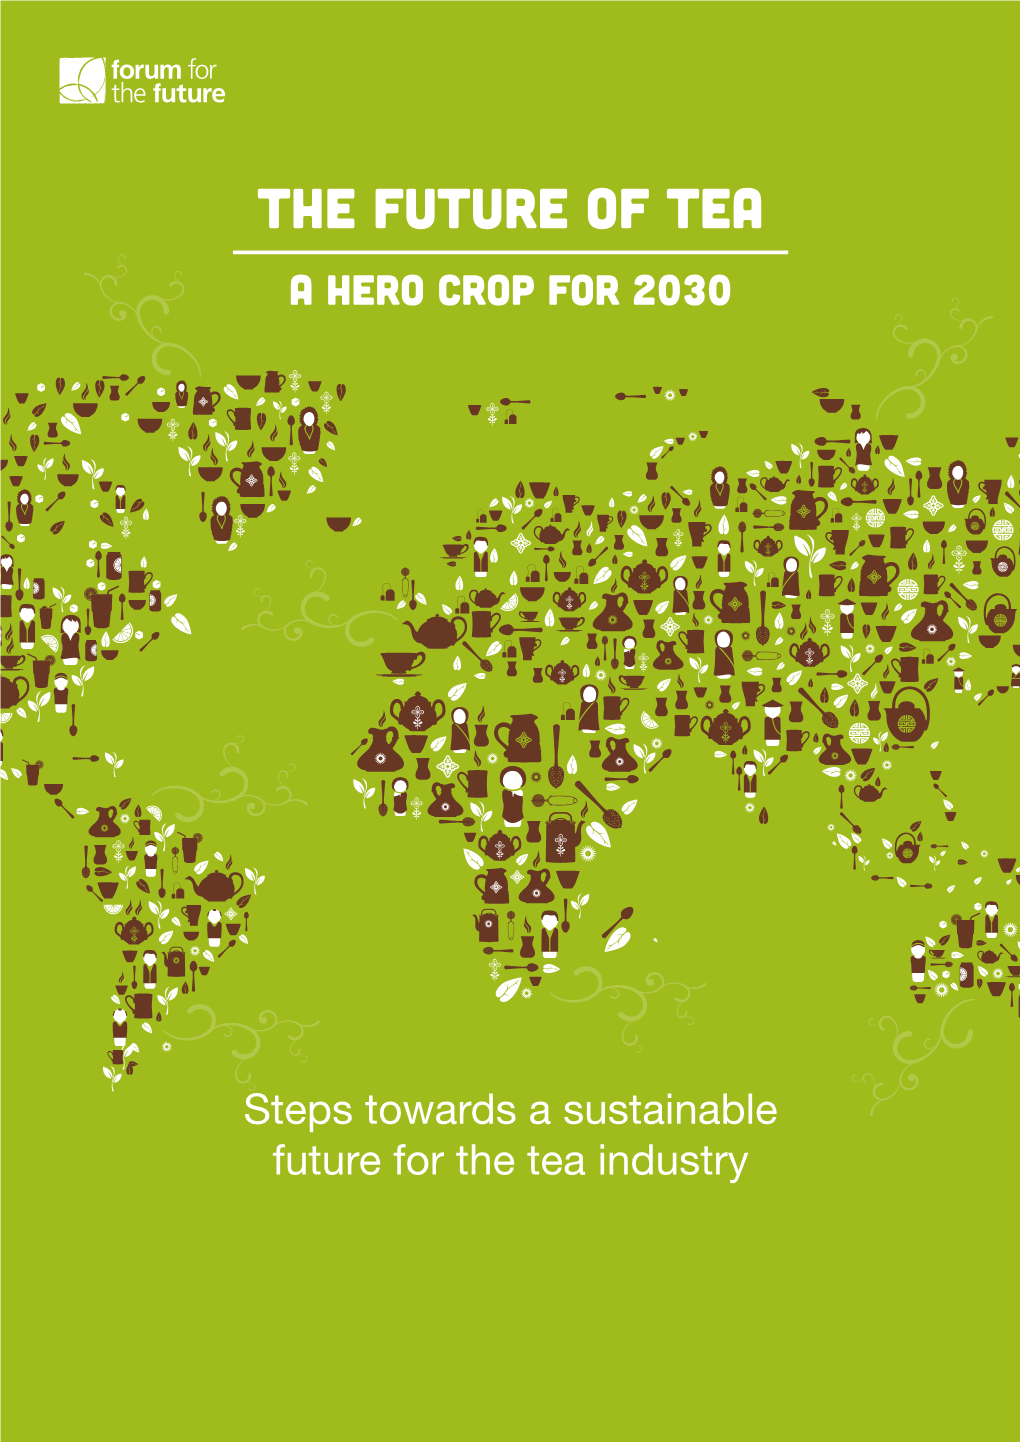 The Future of Tea: a Hero Crop for 2030 | Forum for the Future 2 Table of Contents 1 Executive Summary 4